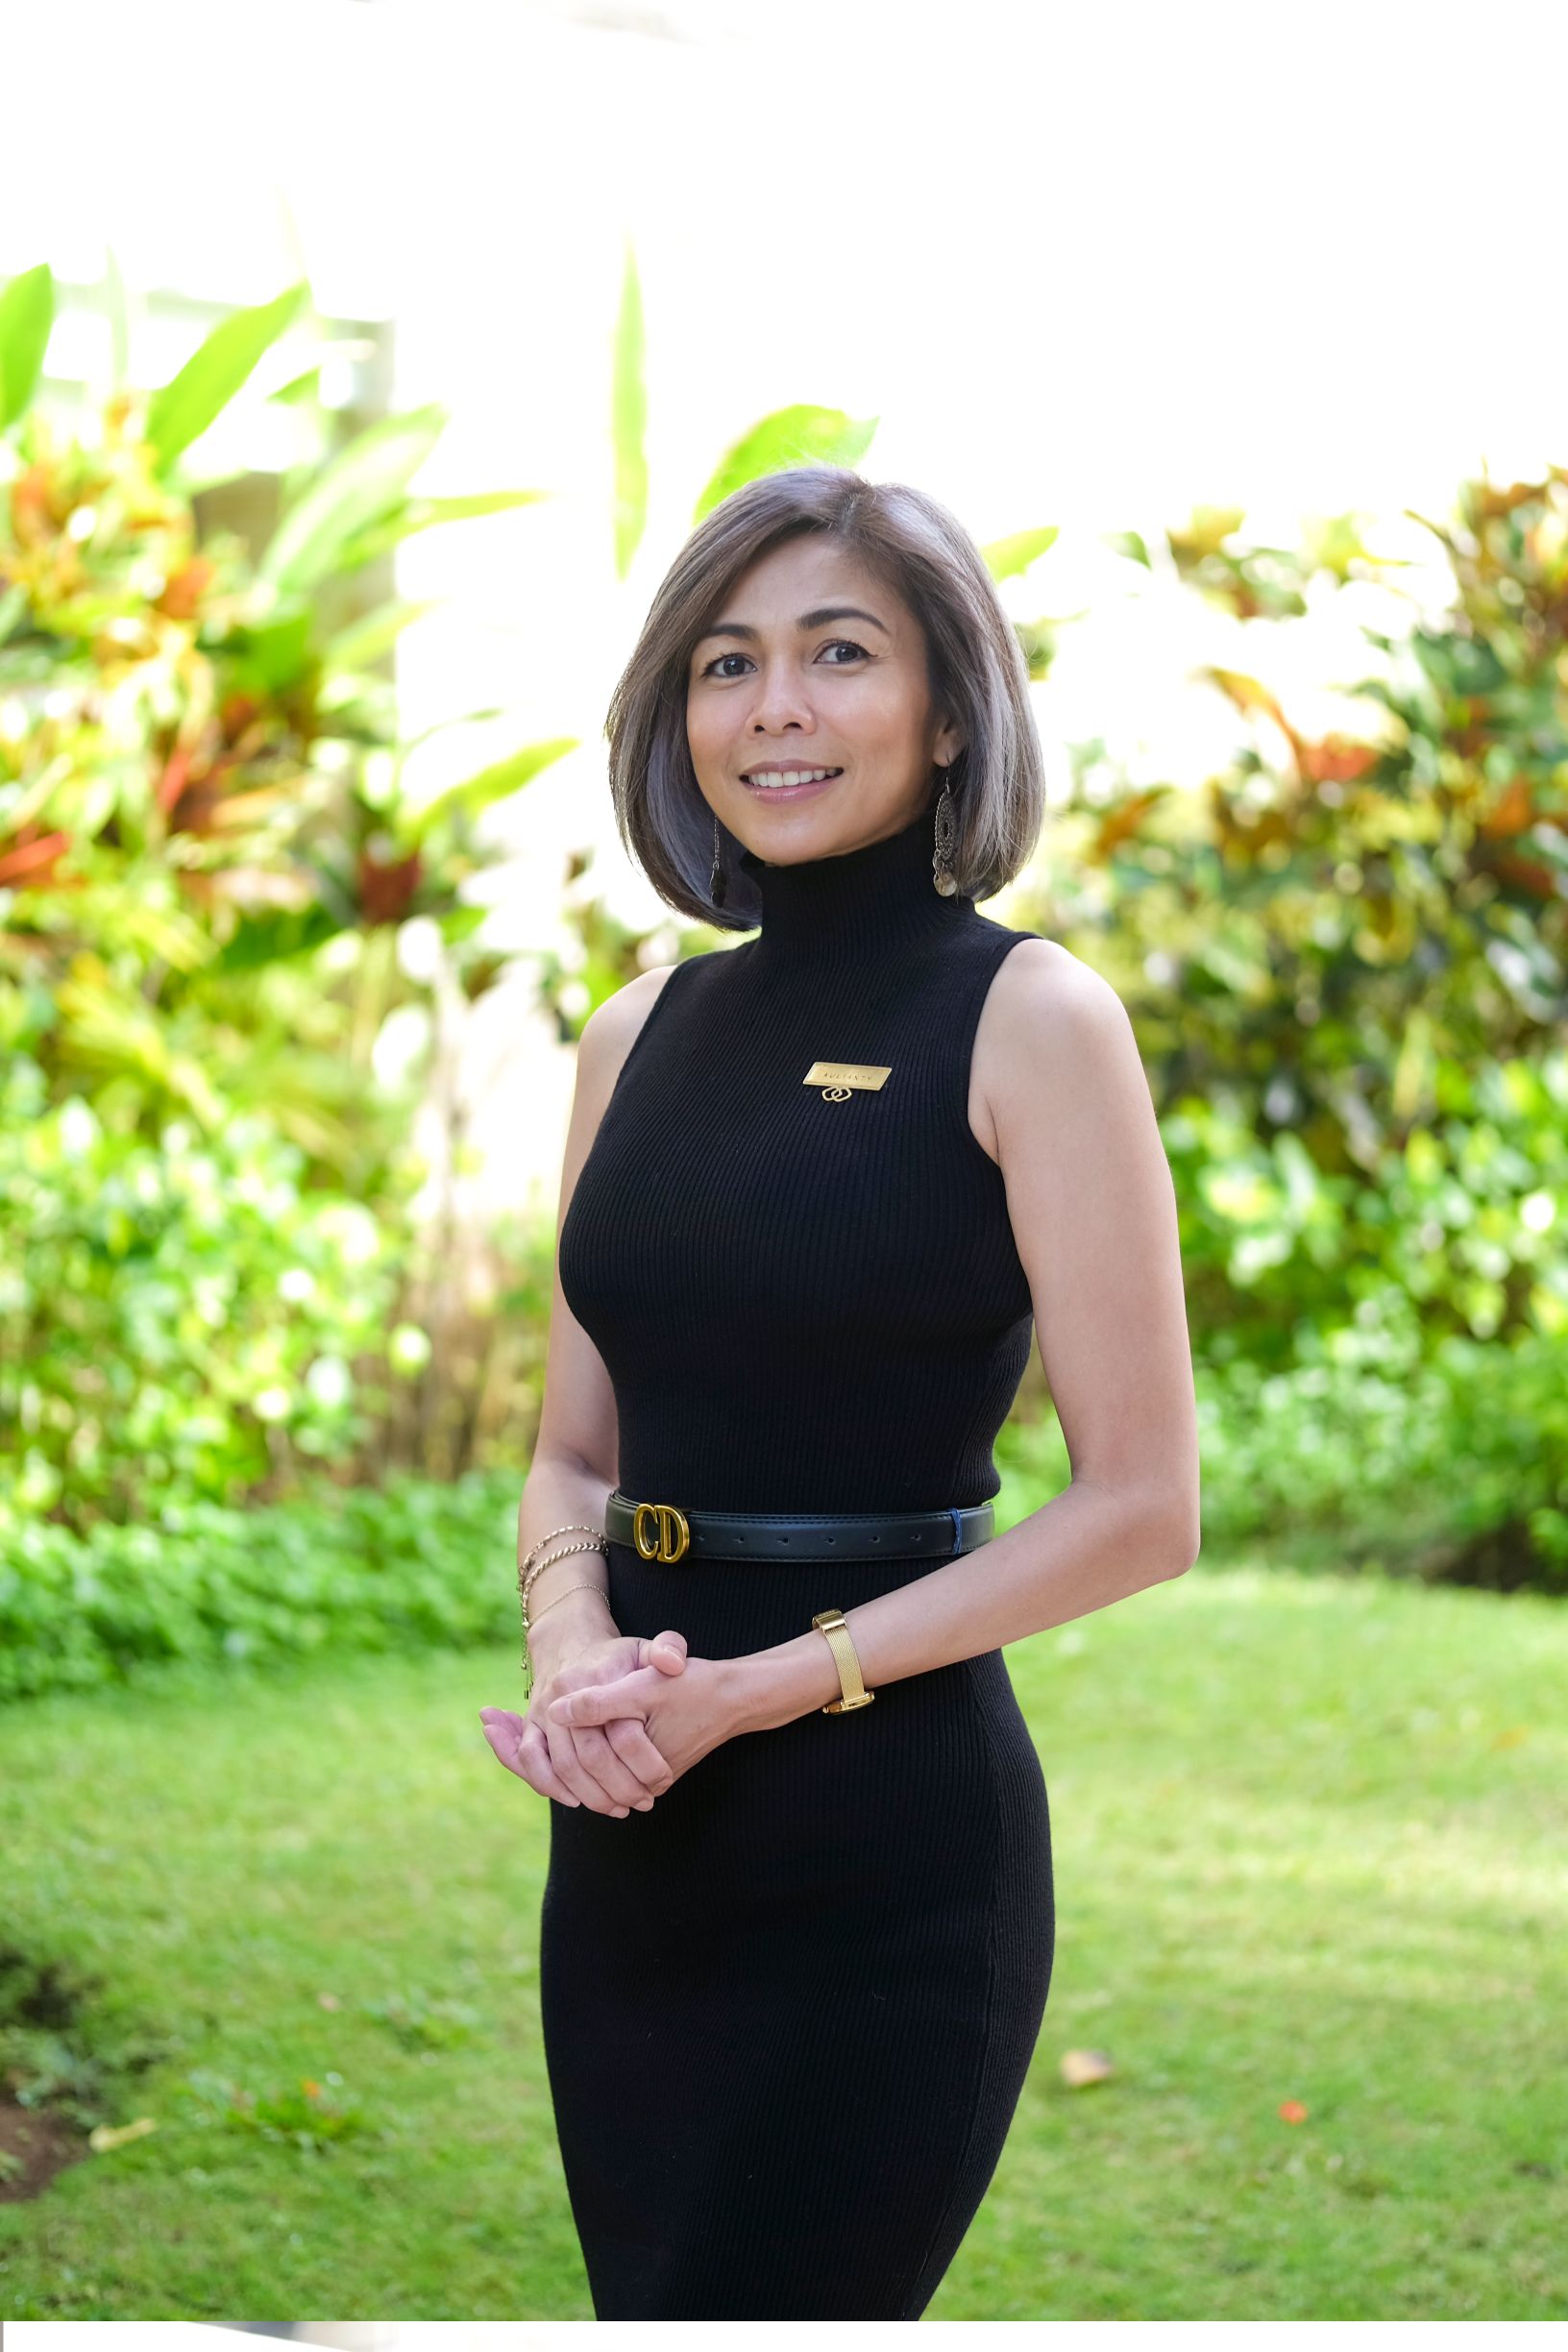 SOFITEL BALI NUSA DUA BEACH RESORT BOLSTERS MARKETING COMMUNICATIONS AND PR WITH THE NEW APPOINTMENT